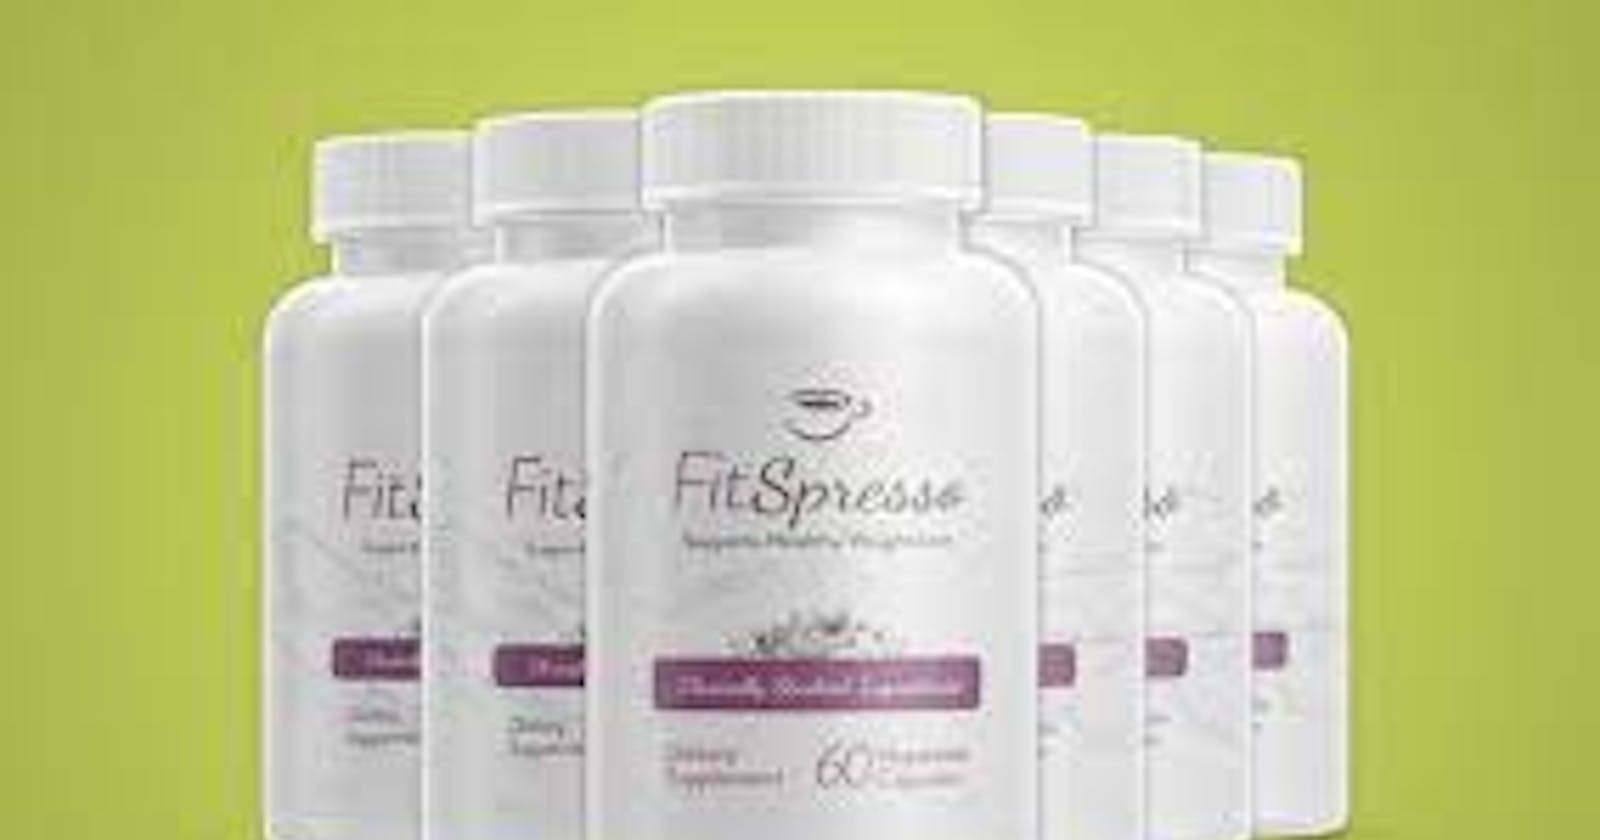 FitSpresso :  Does It Work or Waste of Money?
How Fitspresso Coffee Loophole Brews Up Weight Loss Success (Critical User Alert!)